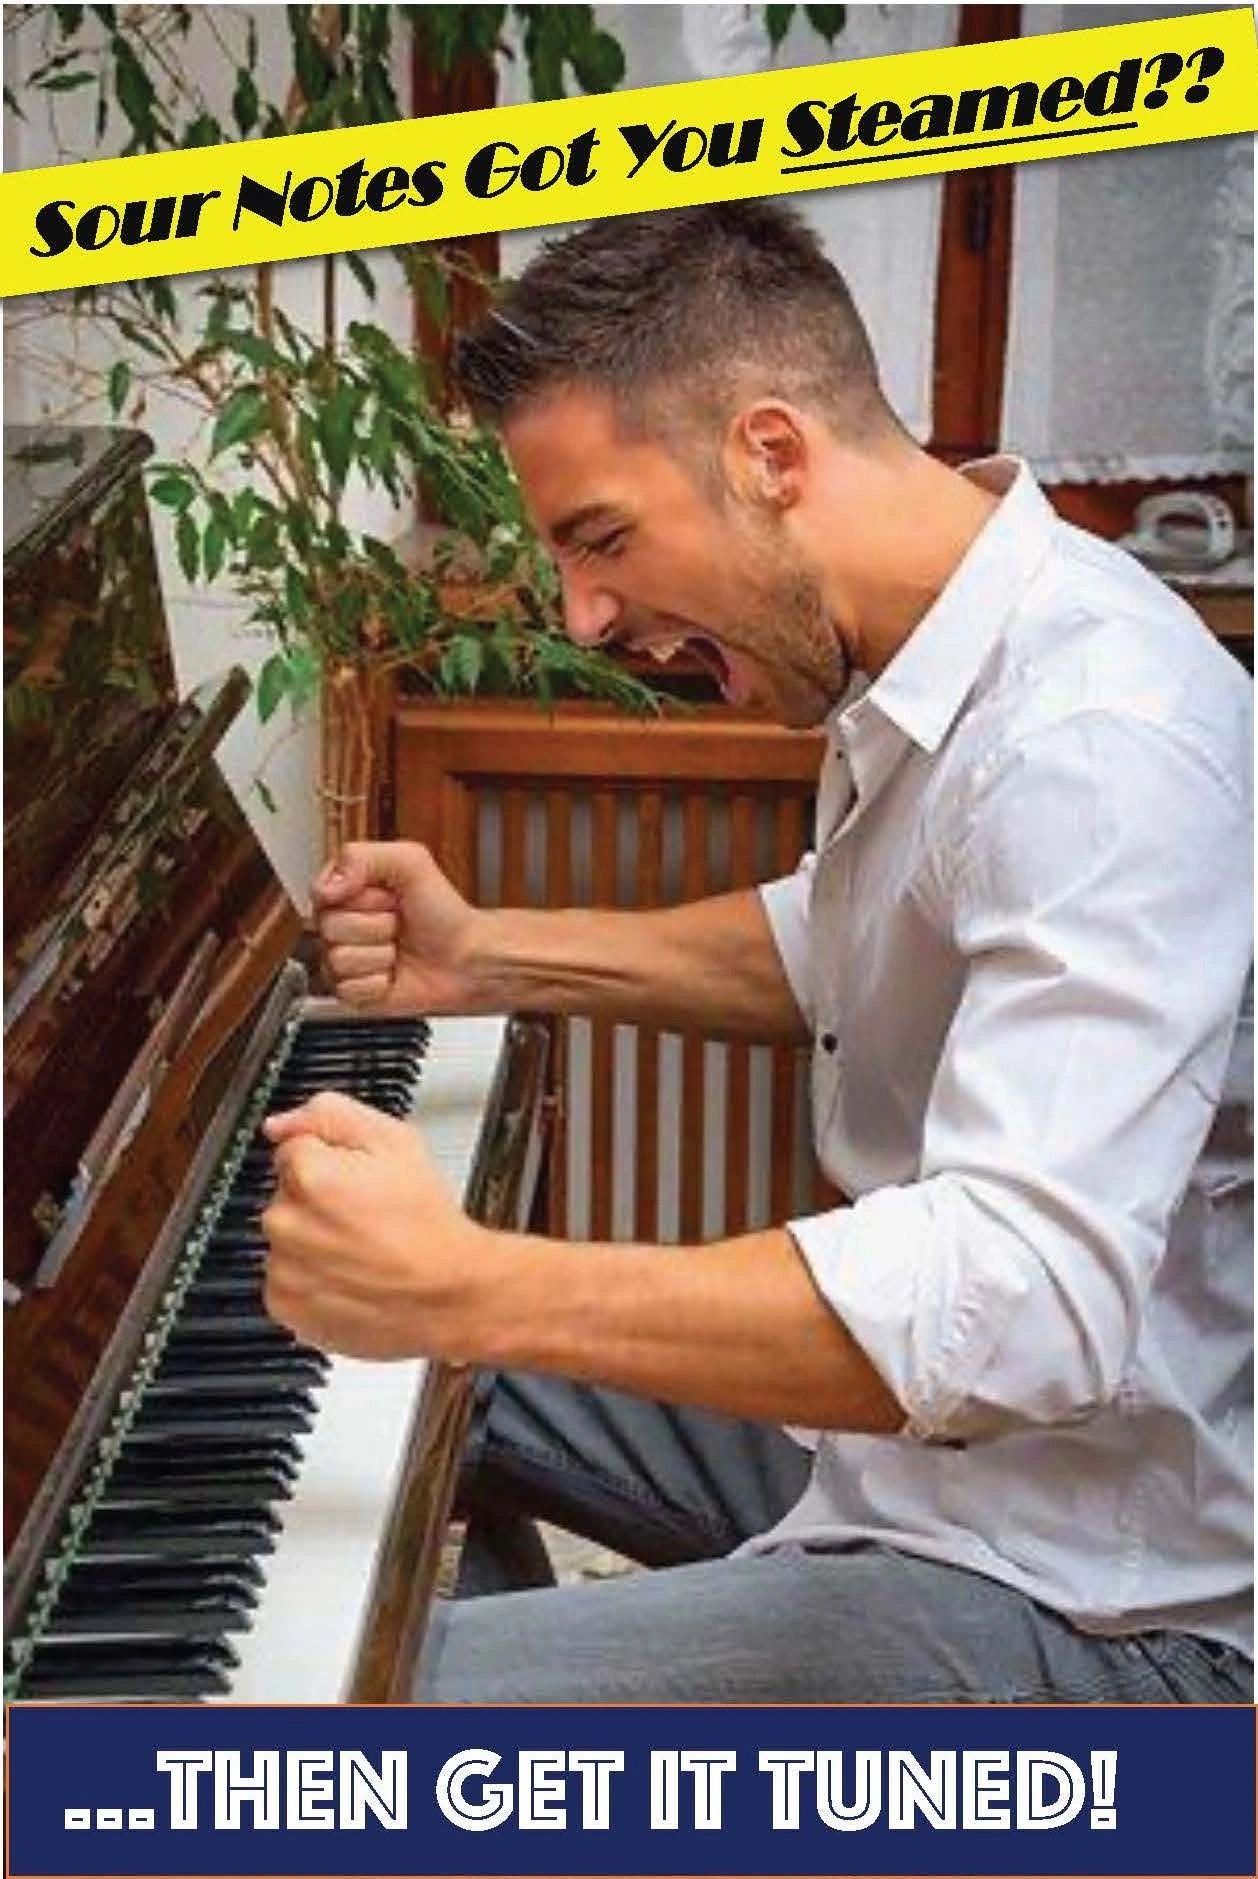 A man sitting in front of a piano